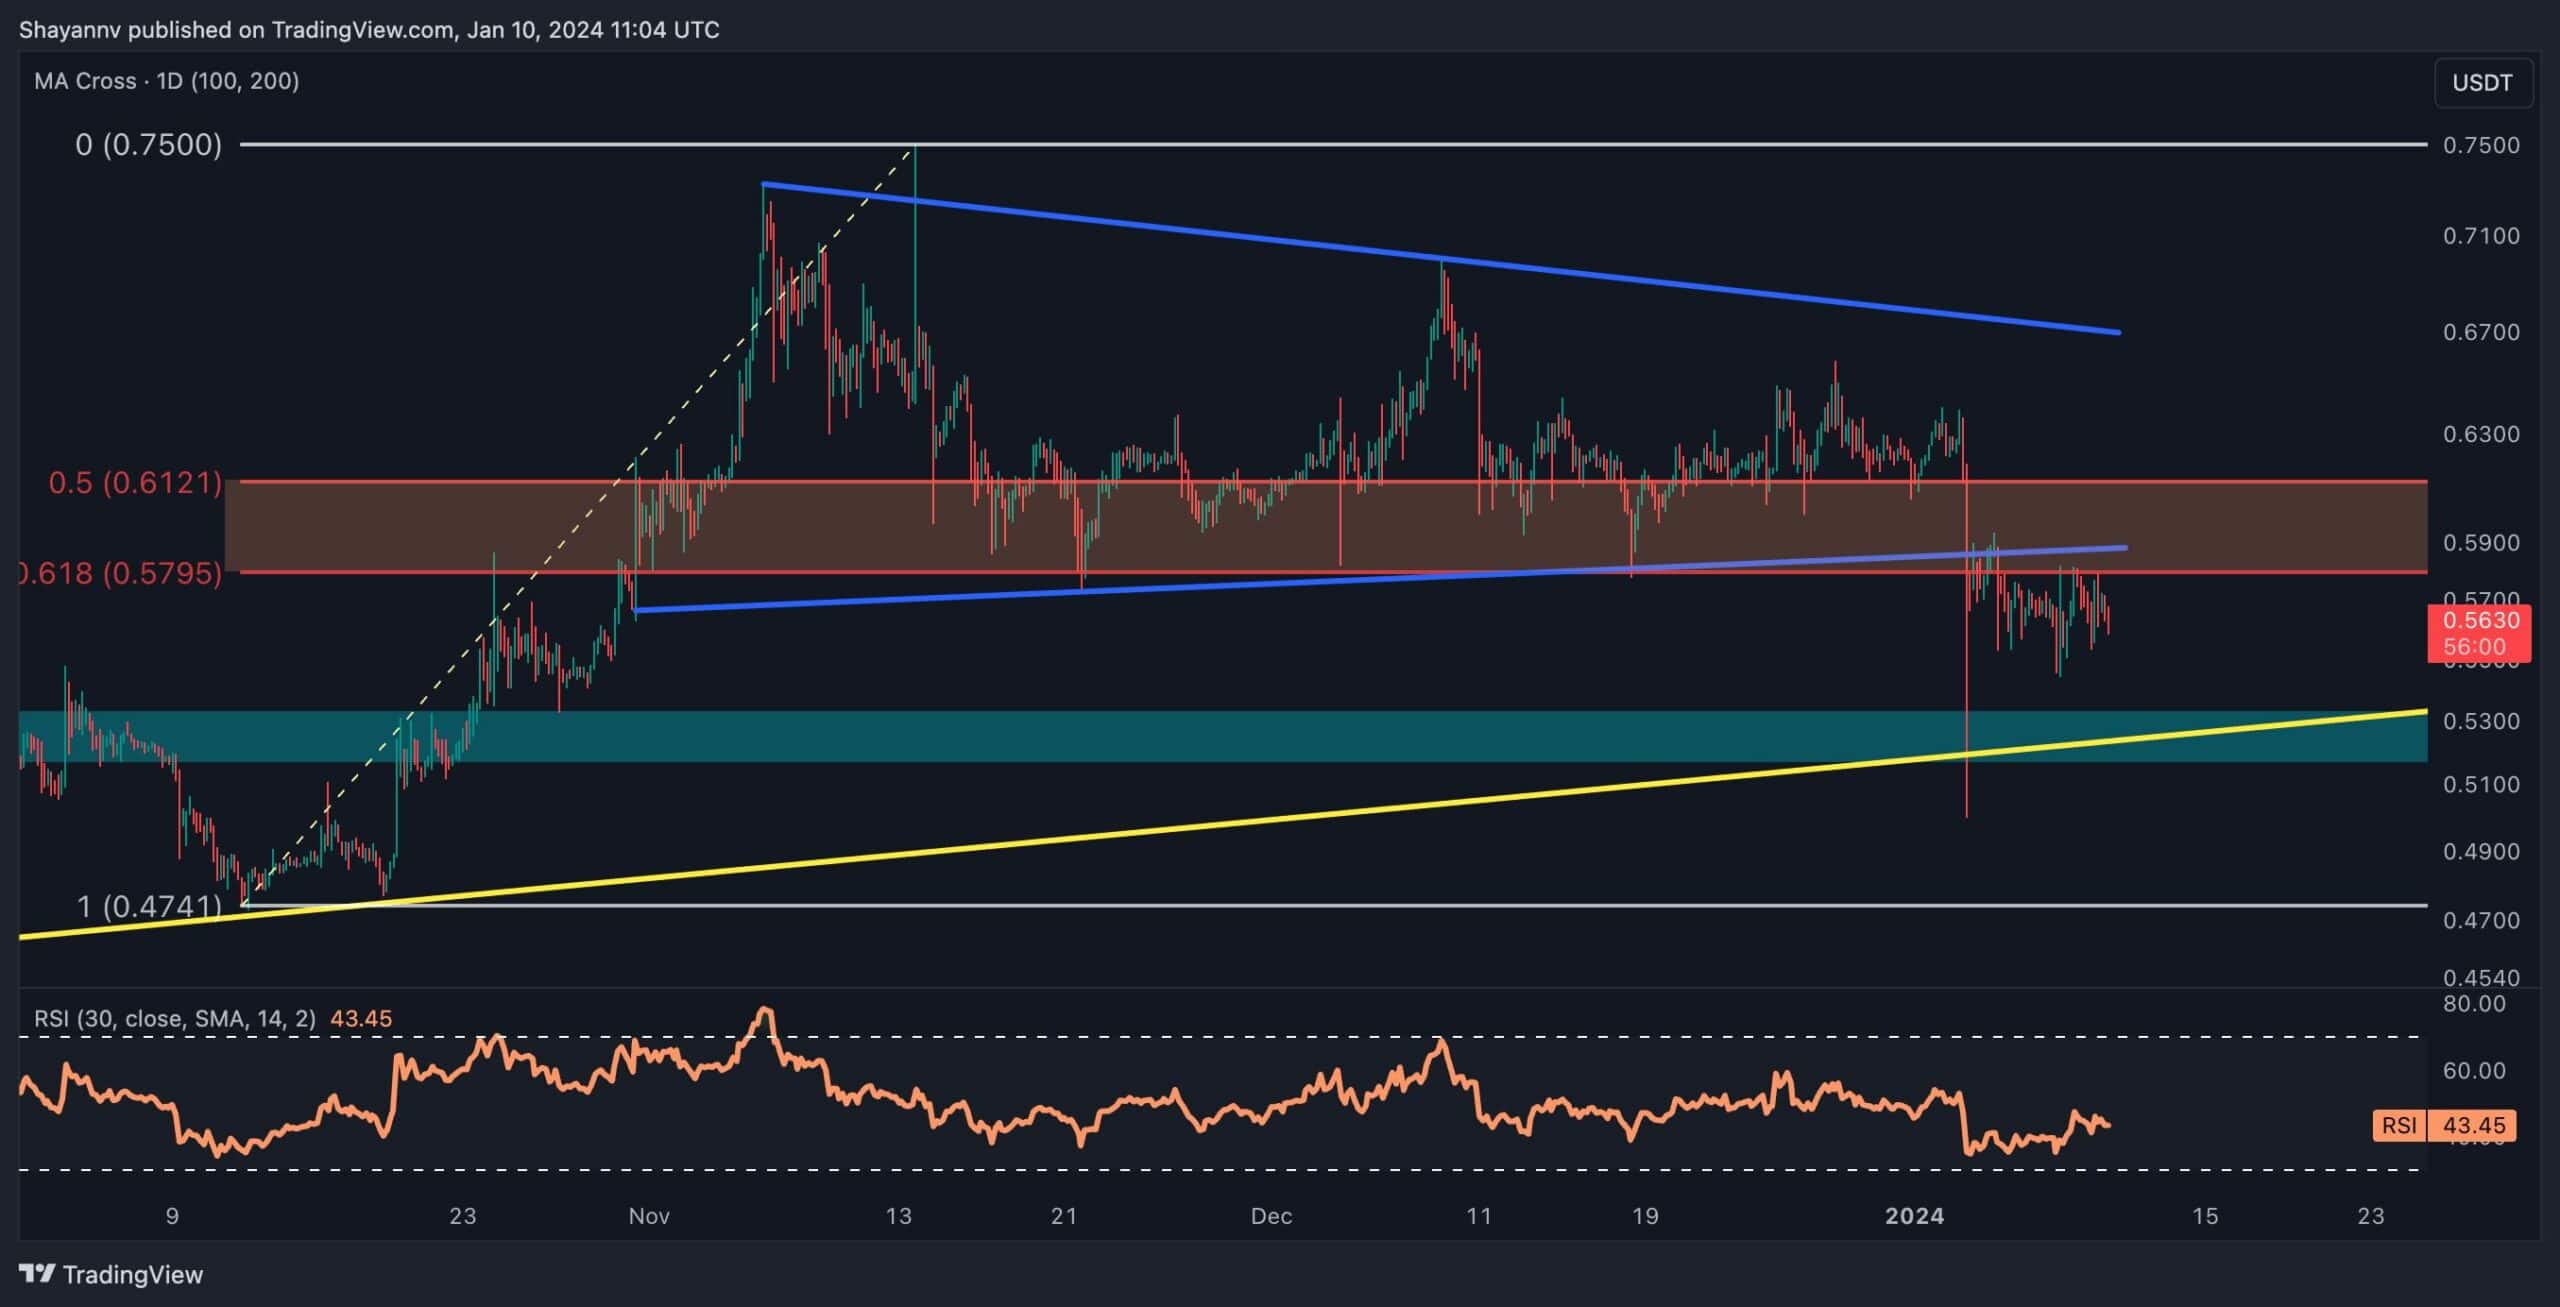 Calm Before the Storm? XRP Looking Primed for Big Move But Which Way? (Ripple Price Analysis)